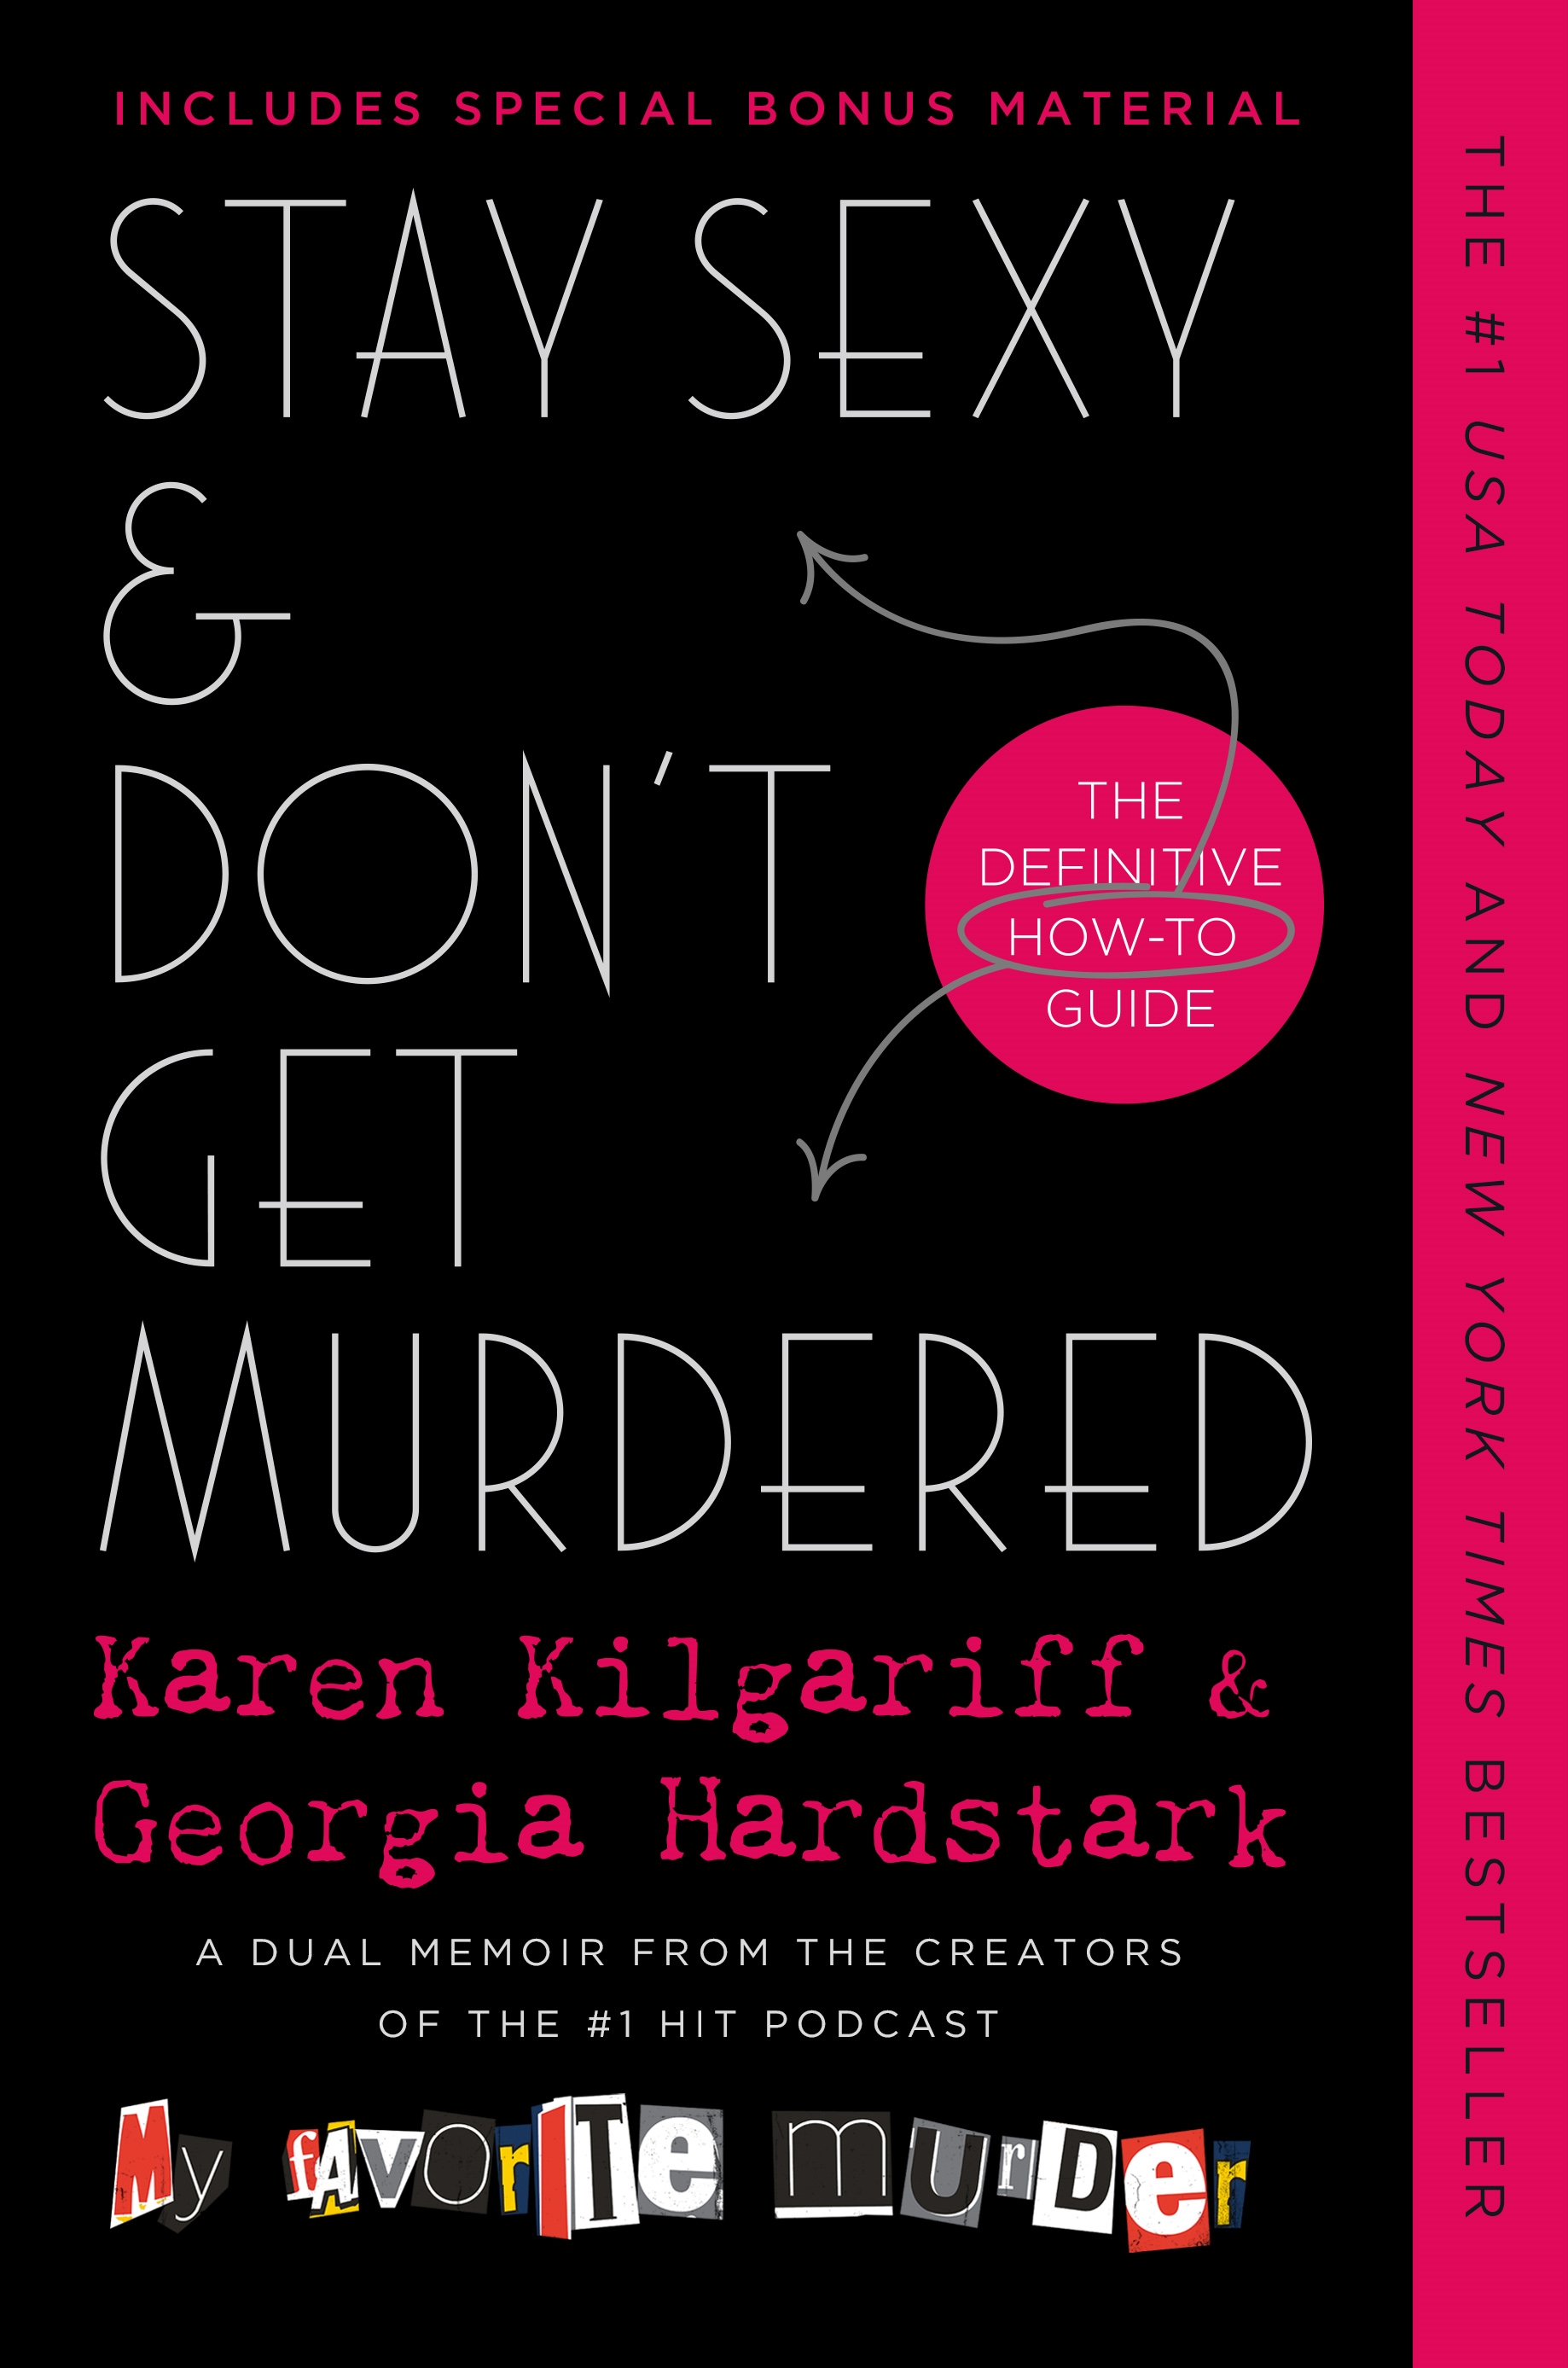 Stay Sexy & Don't Get Murdered : The Definitive How-To Guide by Karen Kilgariff, Georgia Hardstark